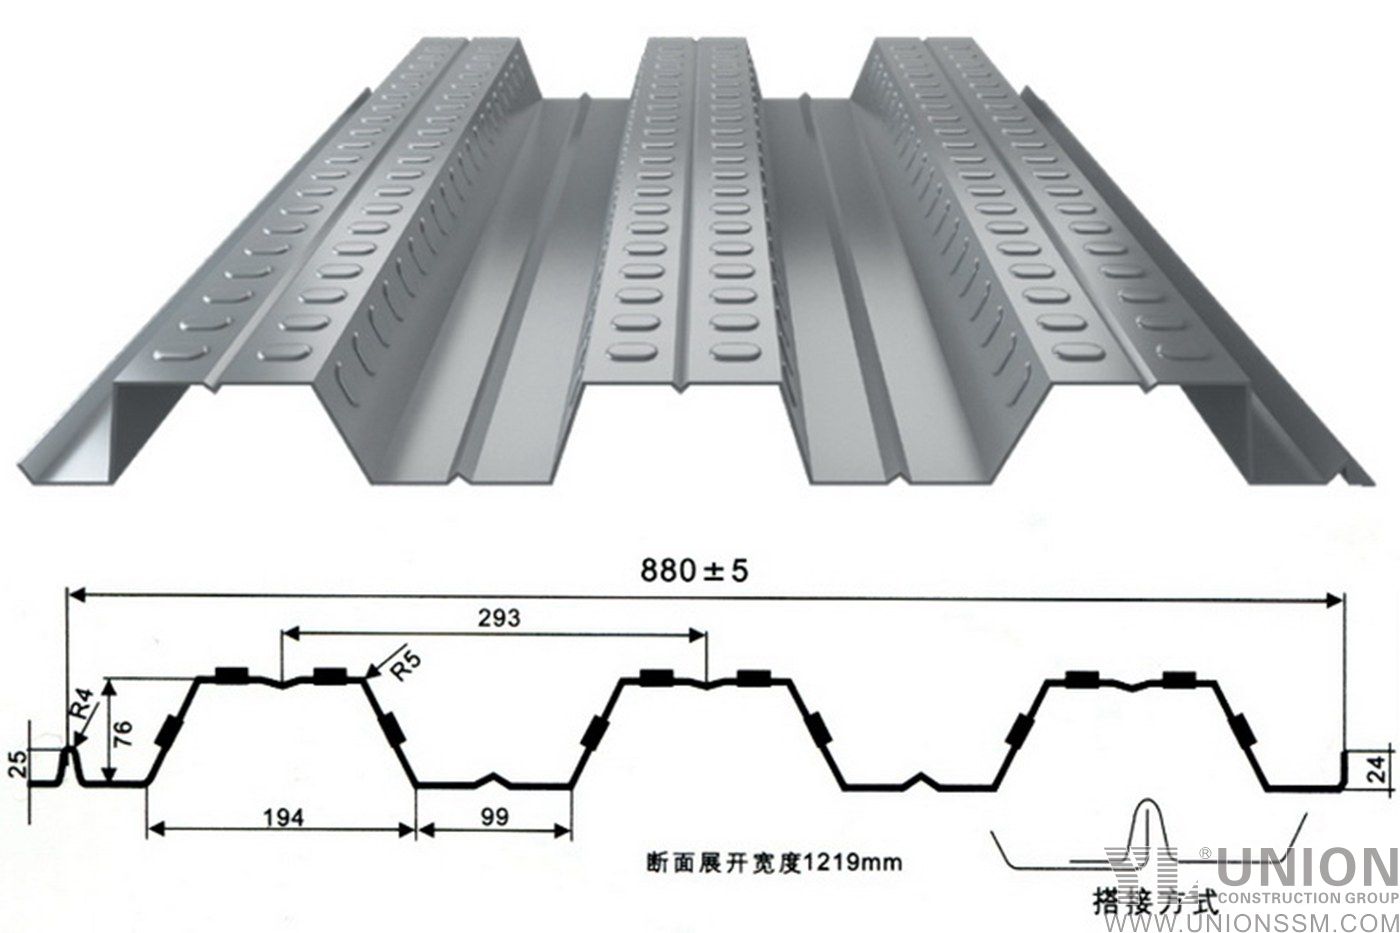 YL76-293-880 Trapezoidal Profile Composite Decking Plate